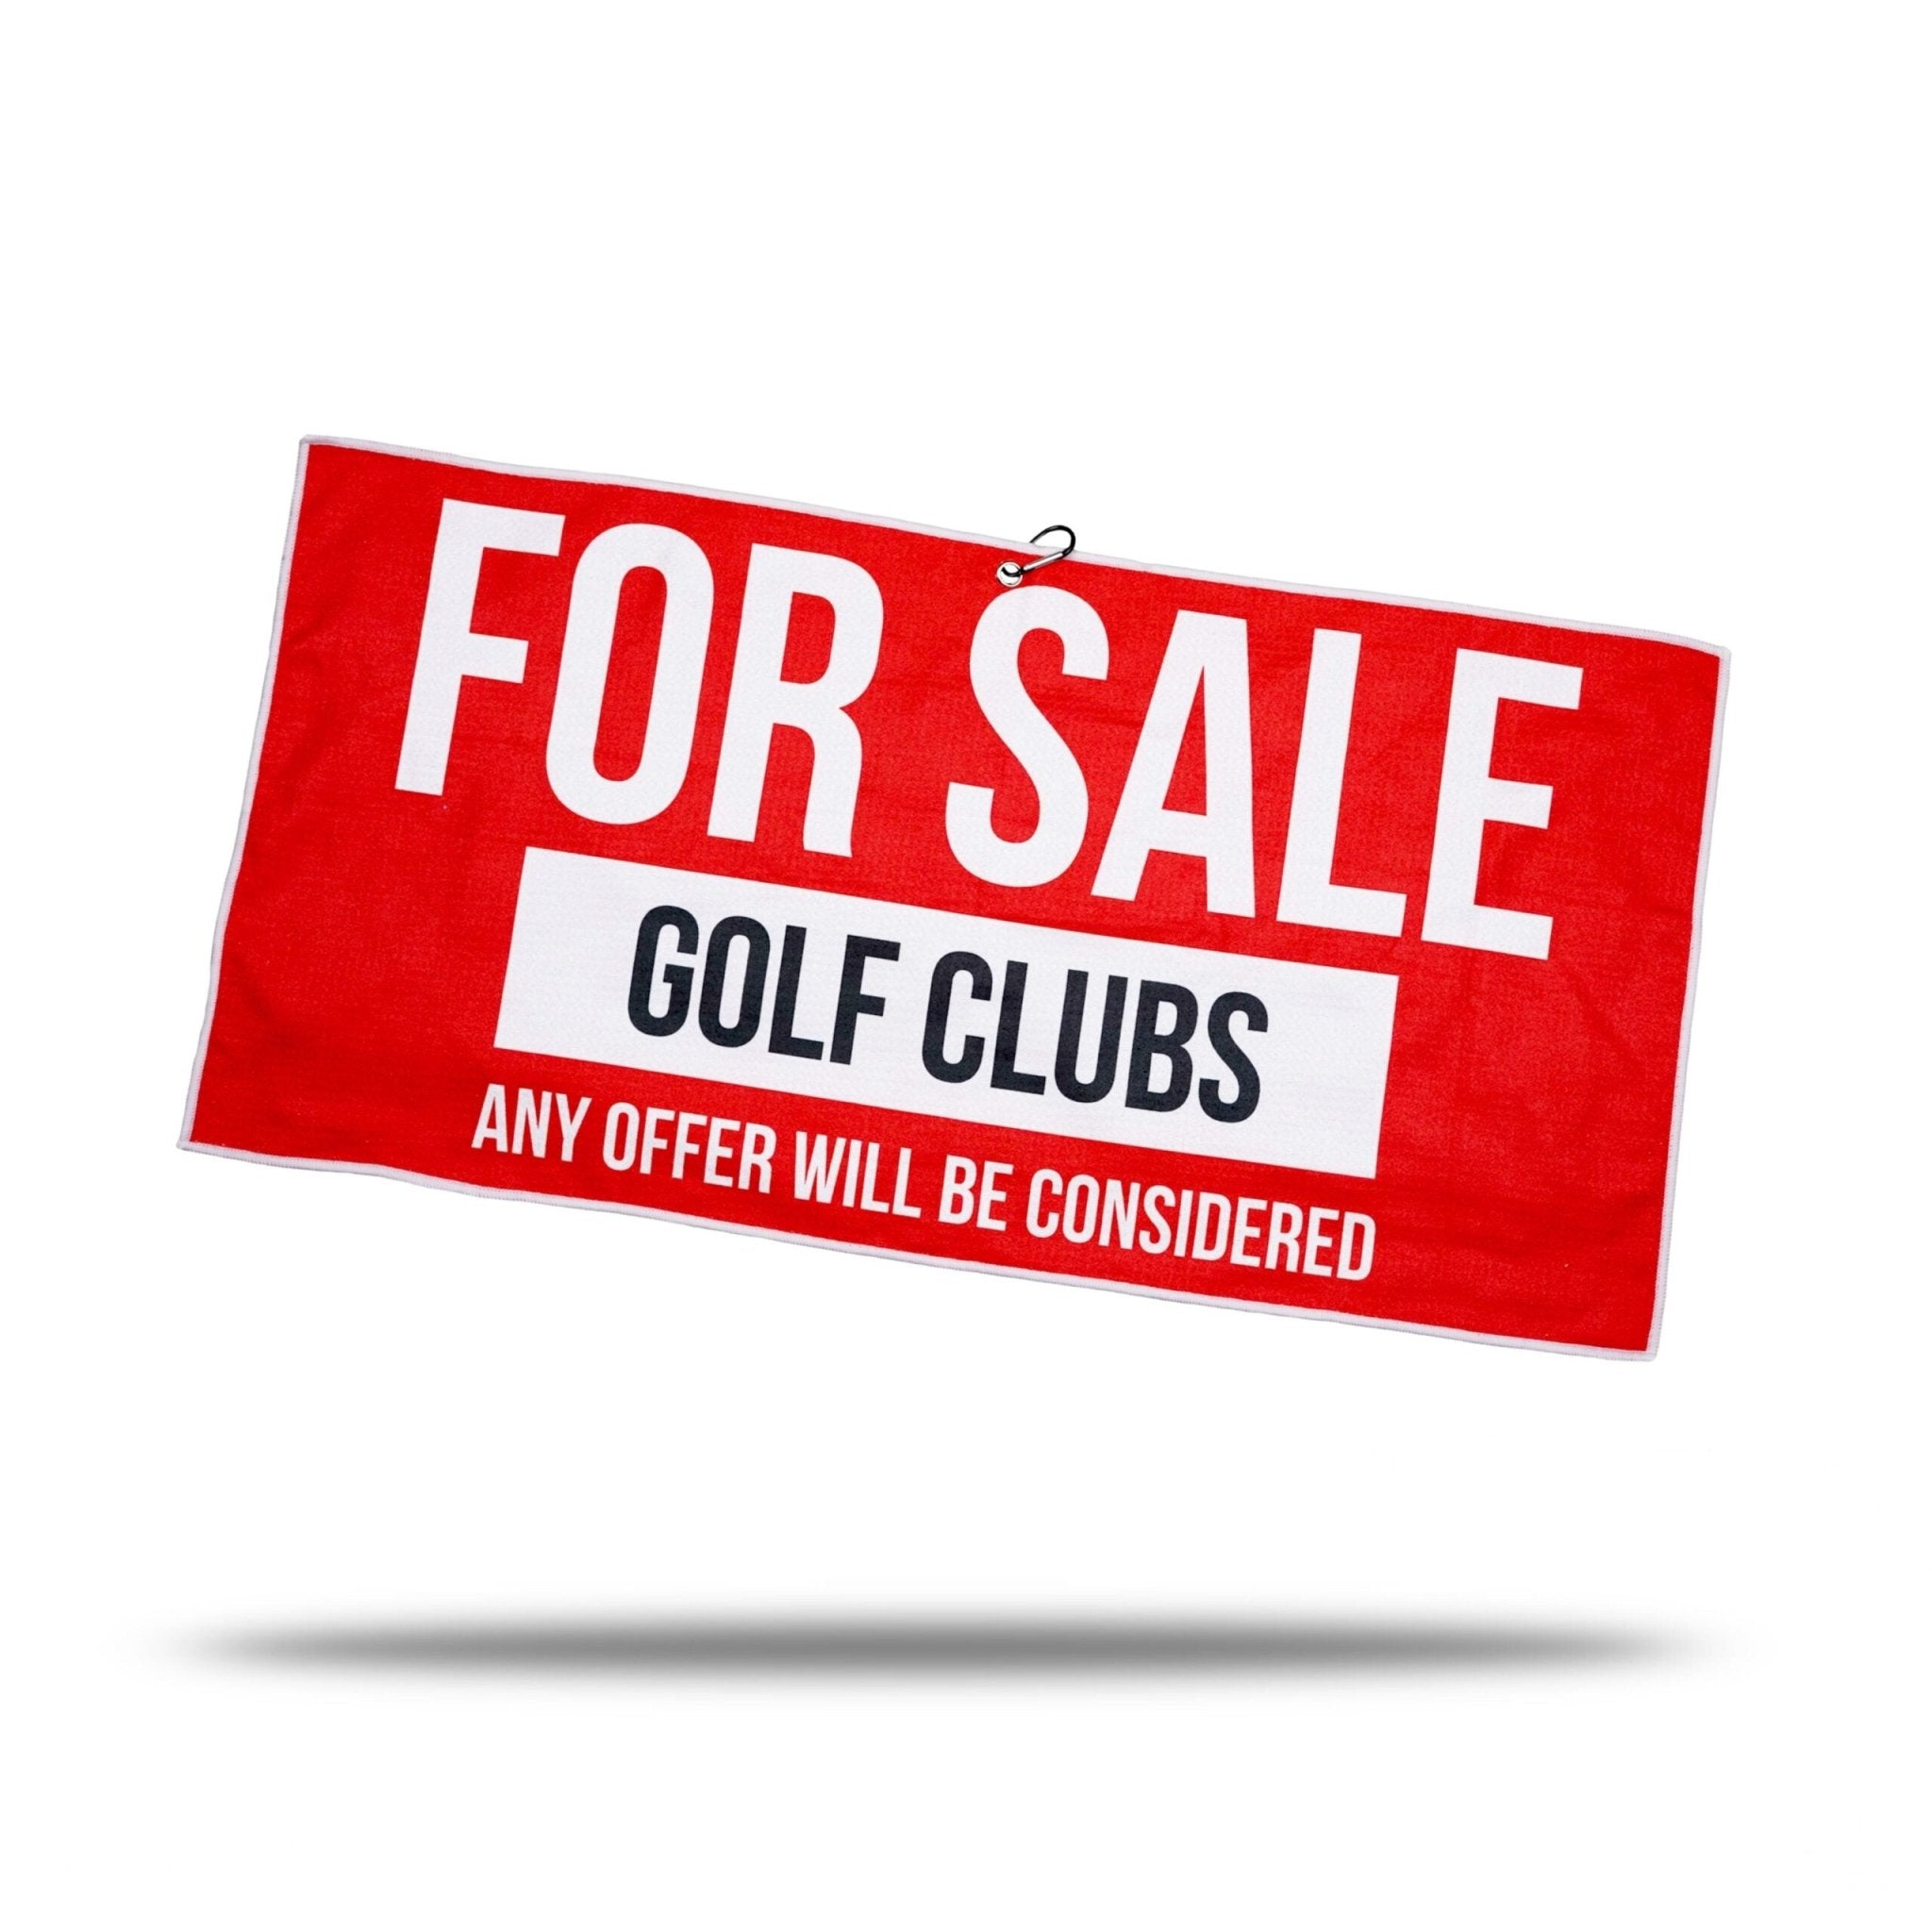 CLUBS FOR SALE - Towel